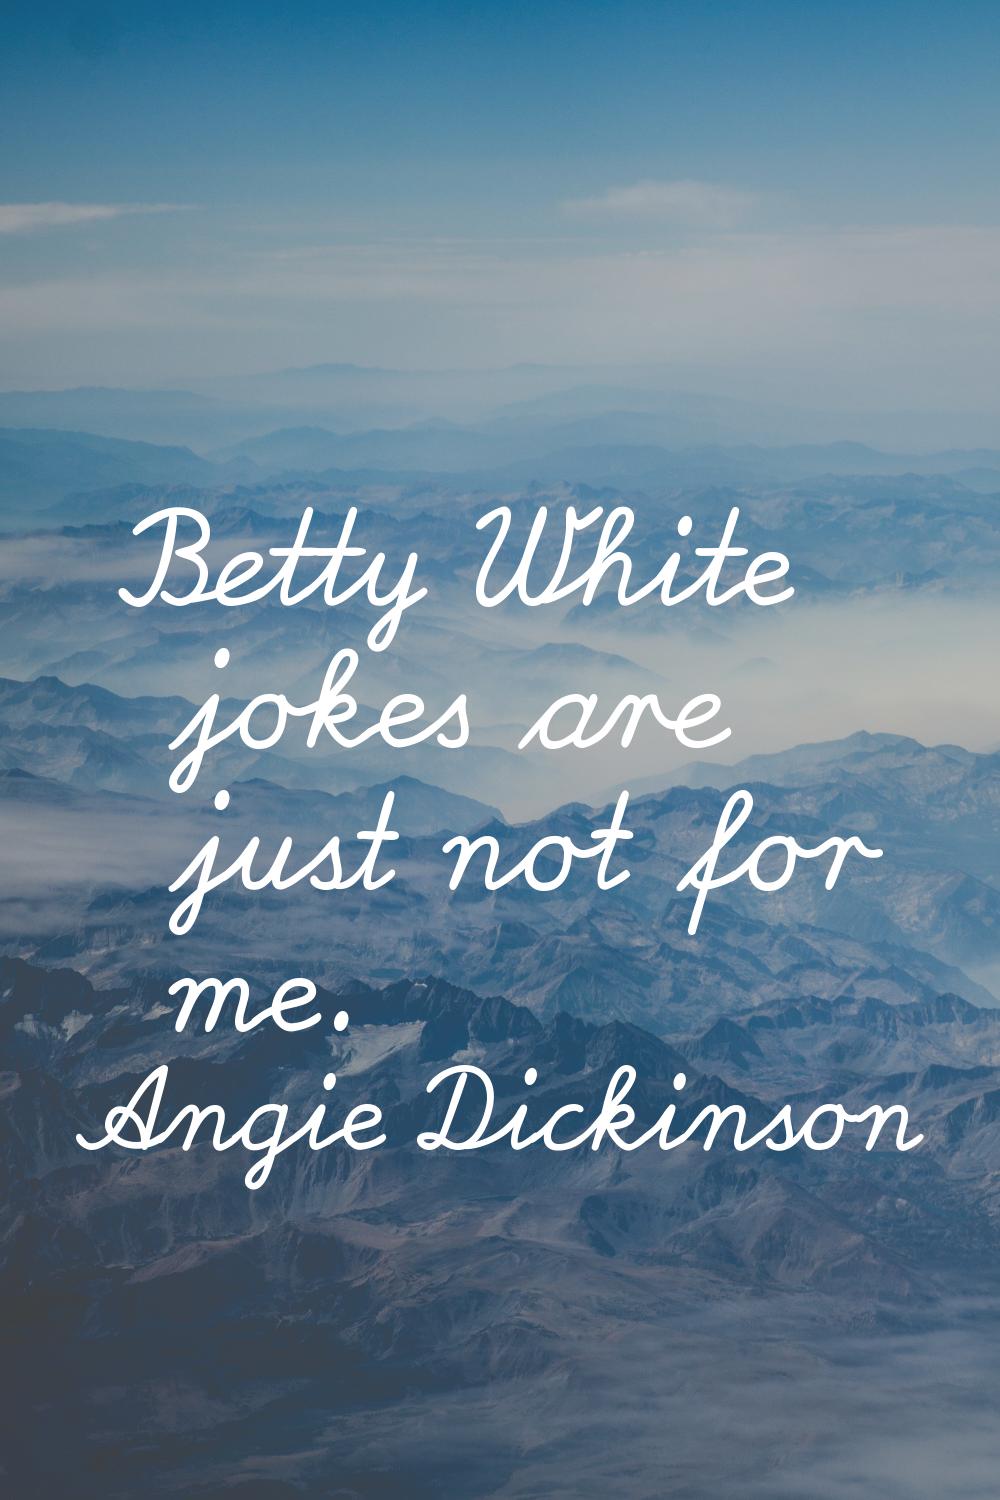 Betty White jokes are just not for me.